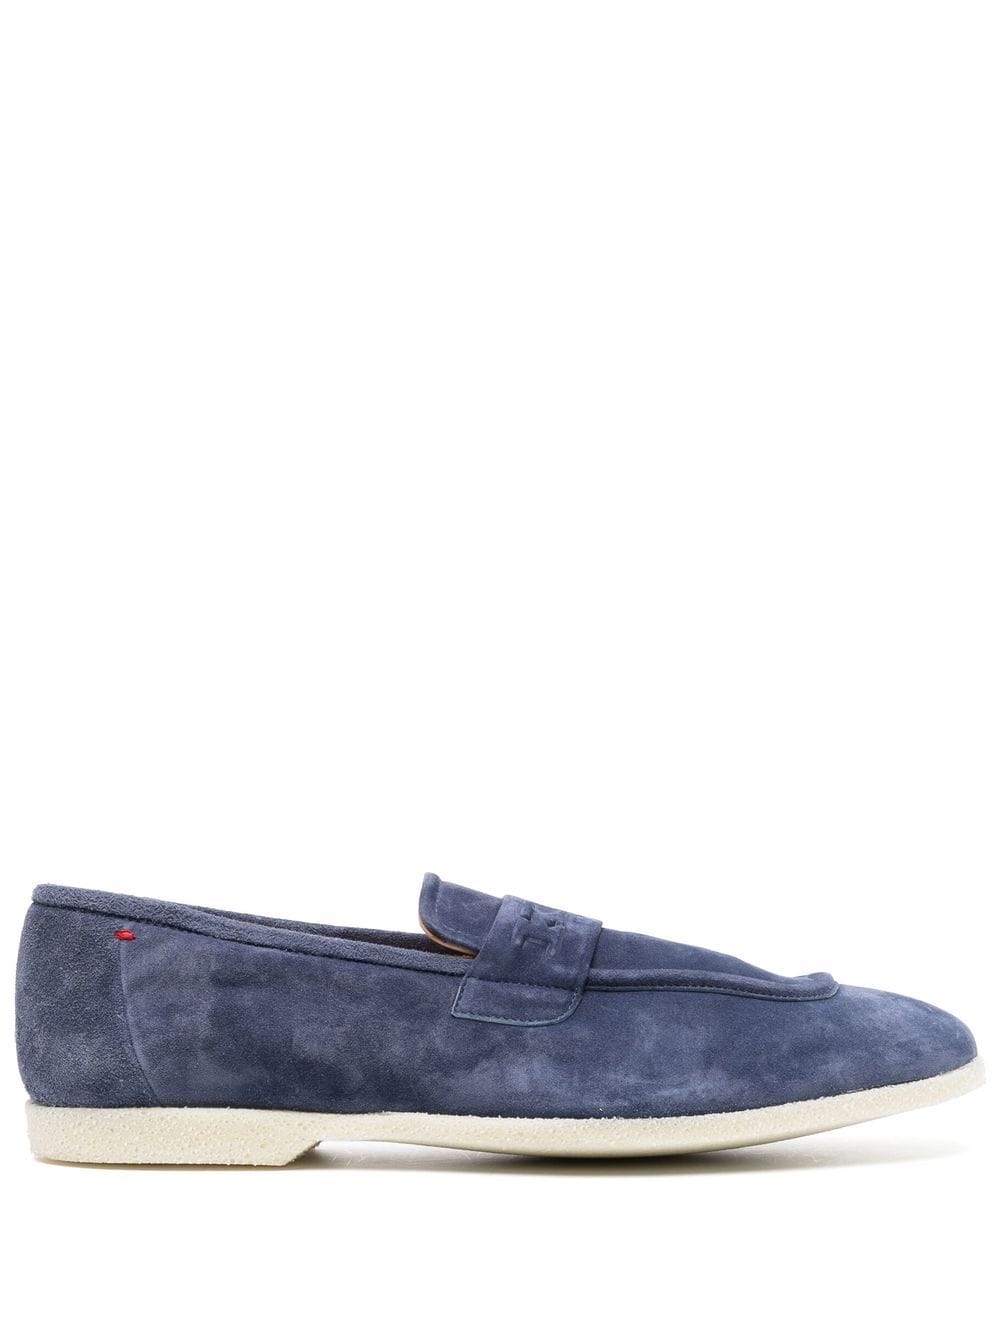 KITON SQUARE-TOE SUEDE LOAFERS